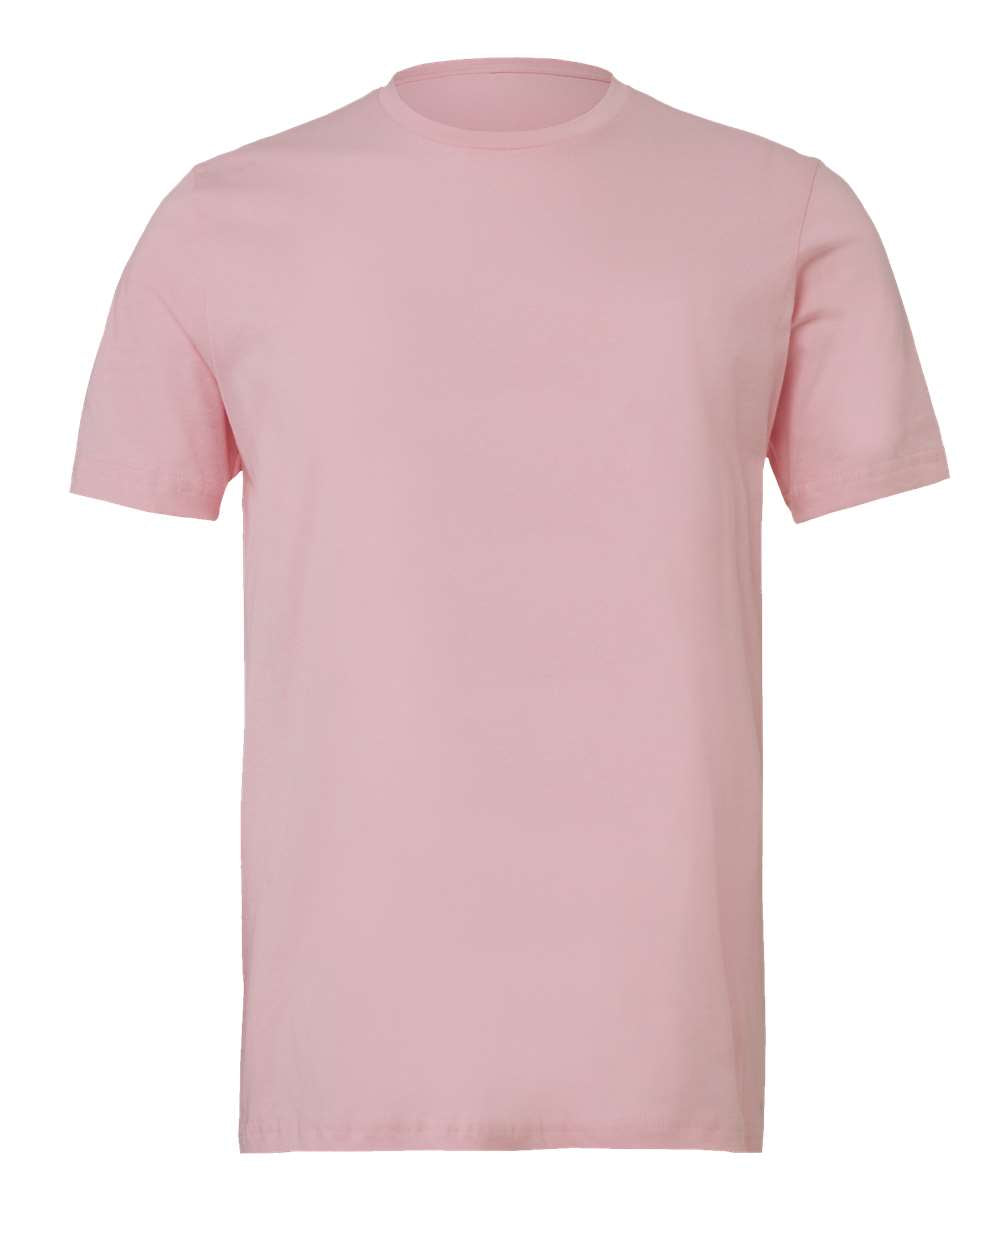 Jersey Tee Child Product 4